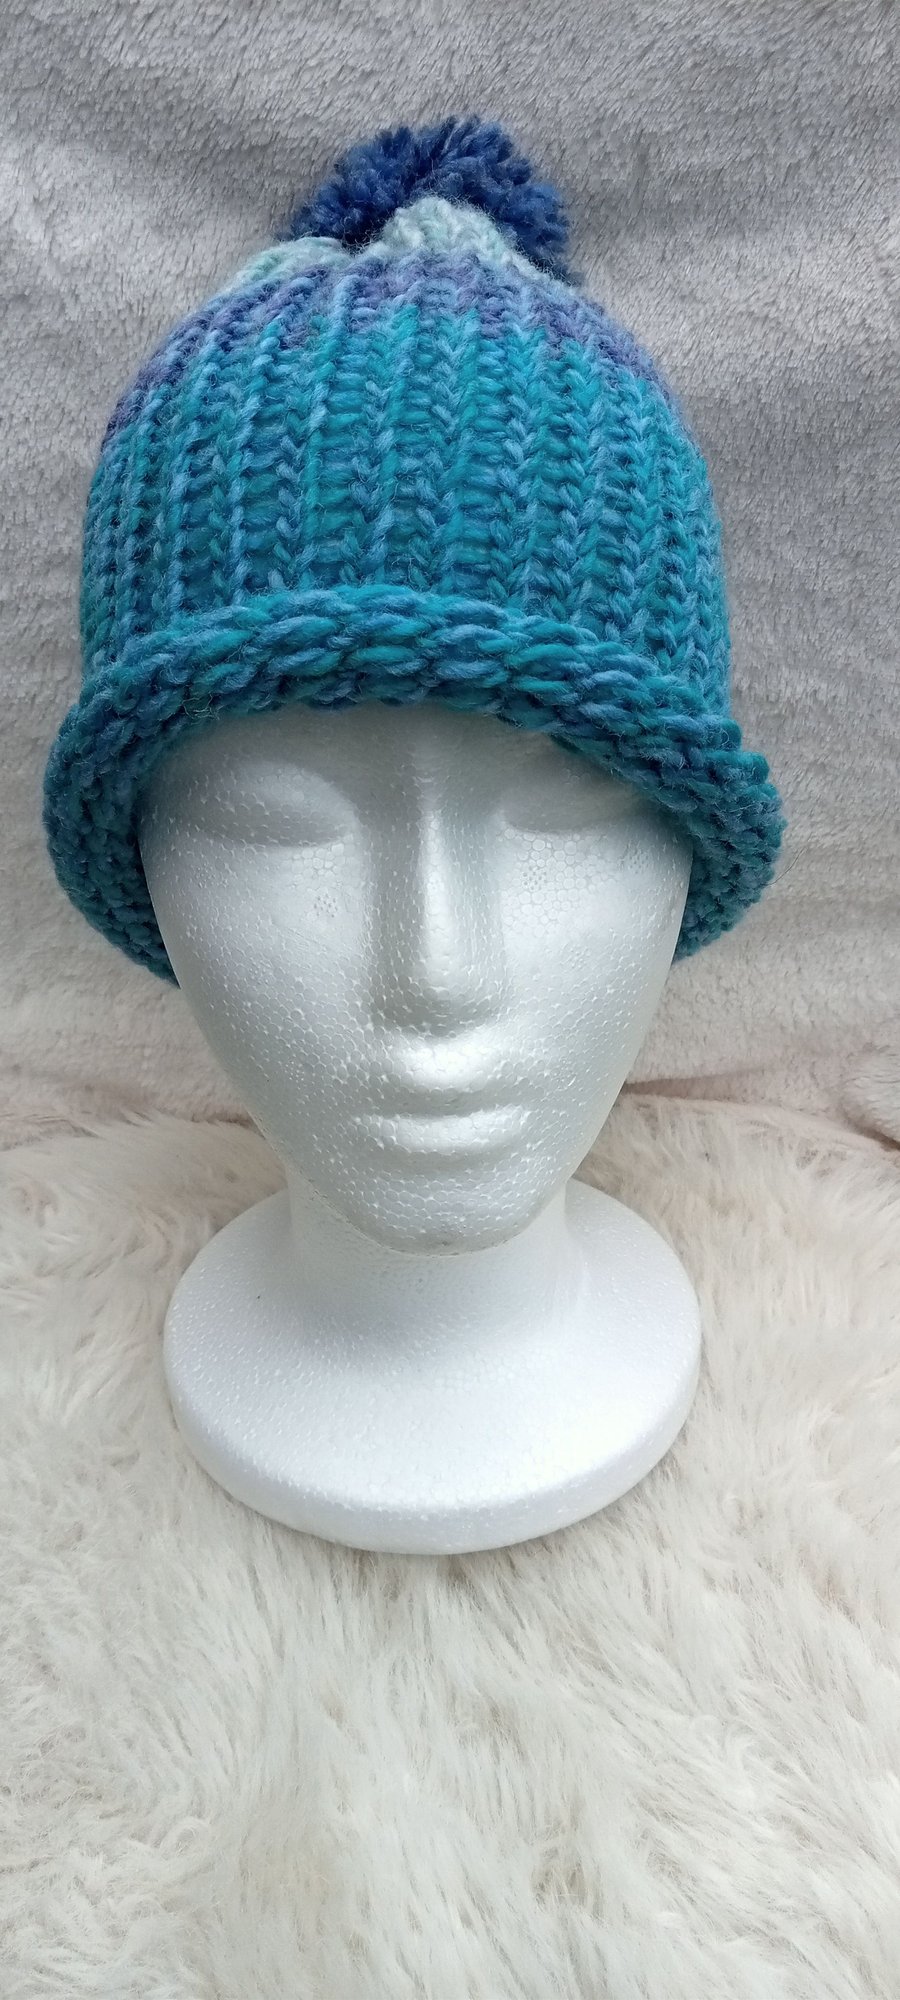 Hand-woven bobble hat, made with chunky wool for warmth.